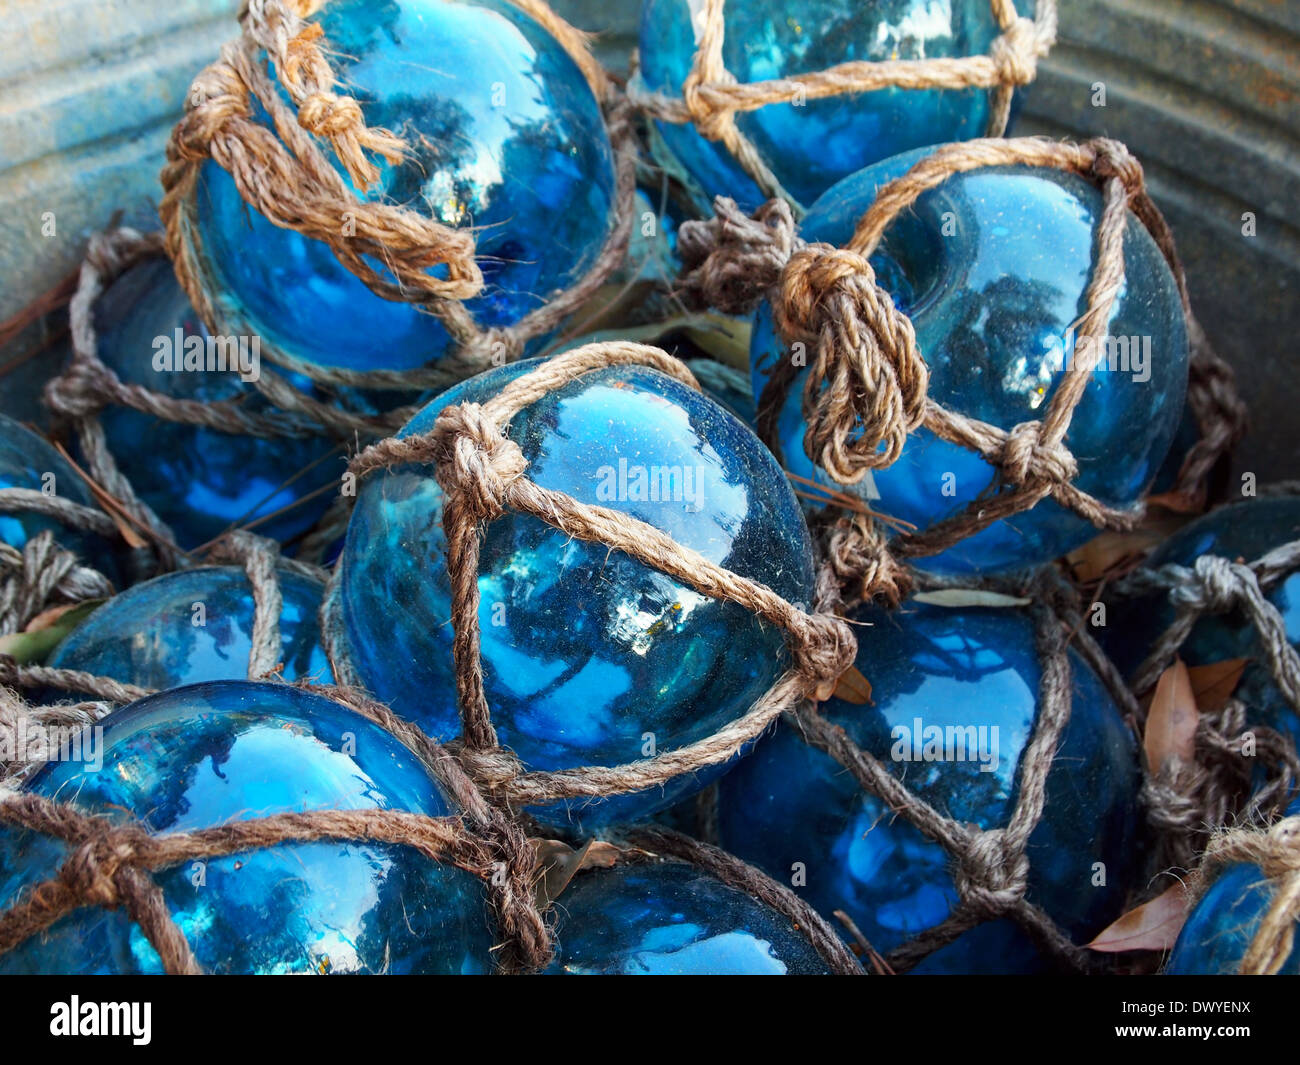 Glass fishing floats with rope knot netting piled in a bucket. Stock Photo